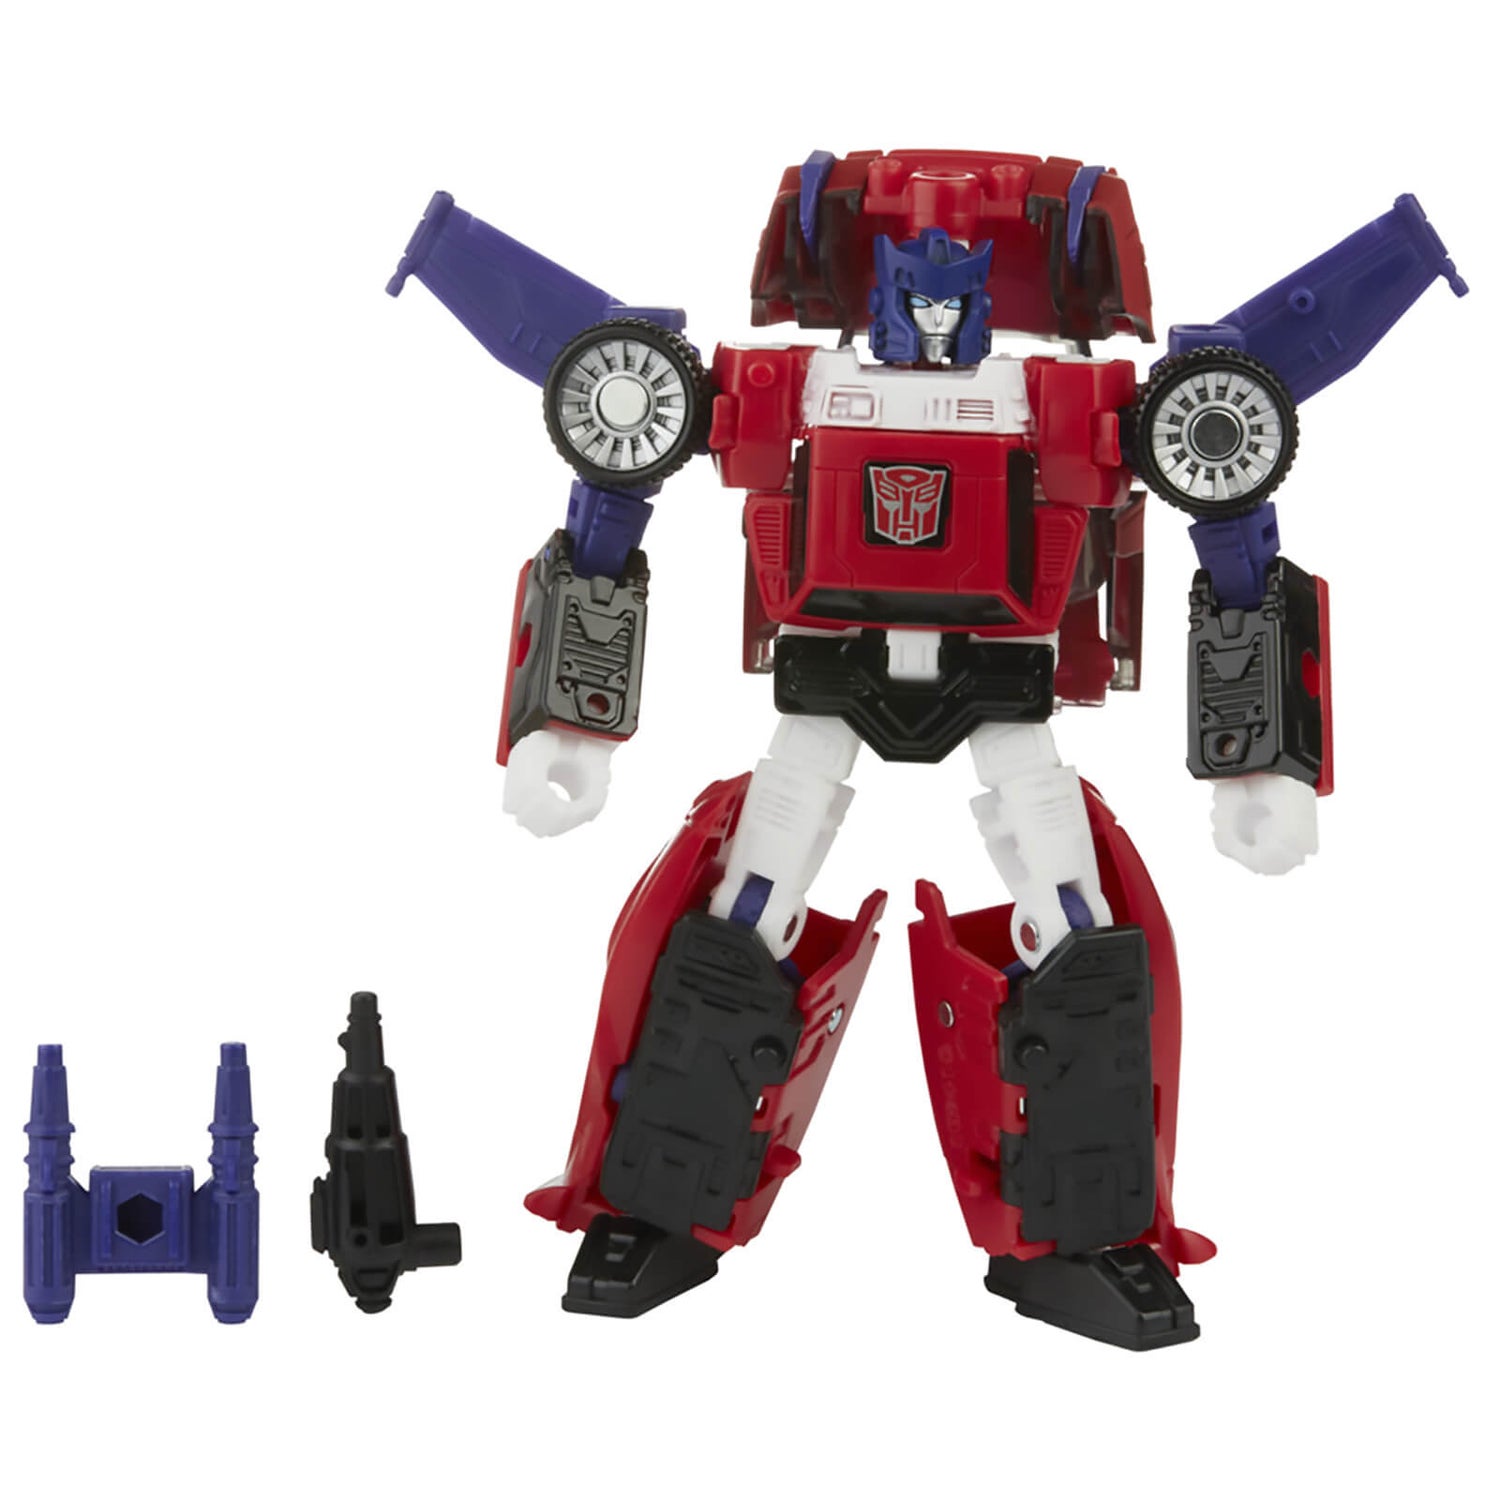 Hasbro Transformers Generations War for Cybertron: Kingdom Deluxe WFC-K41 Autobot Road Rage Action Figure